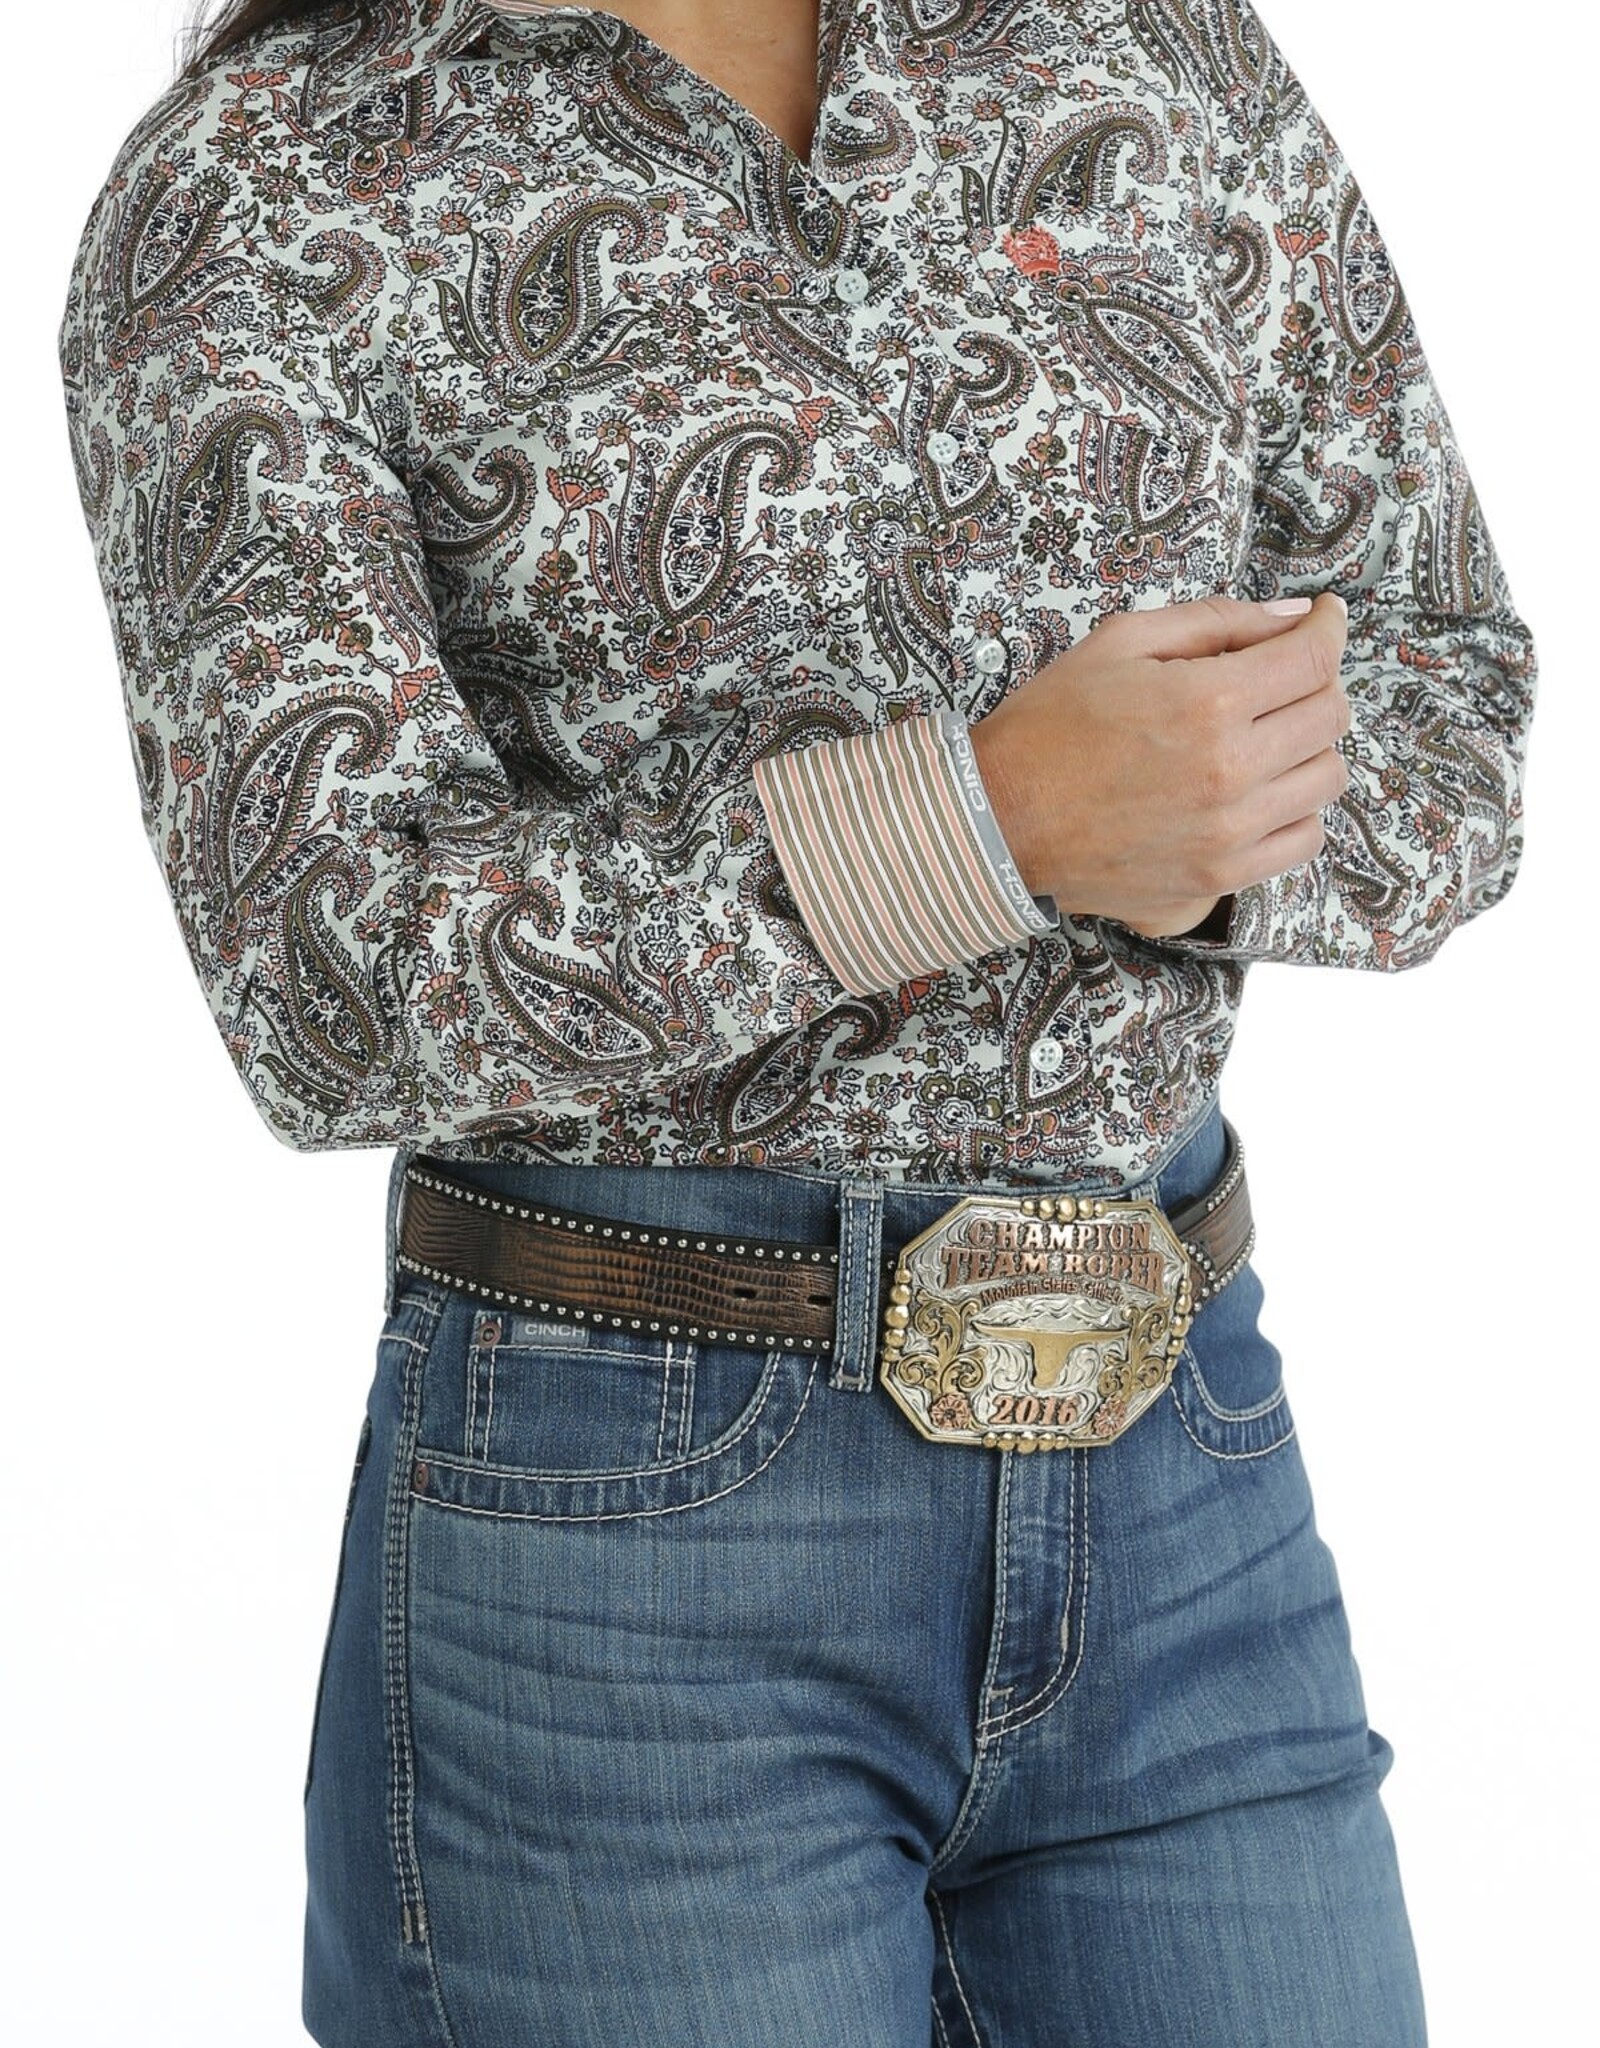 Cinch Womens Cinch Coral and Olive Paisley Long Sleeve Button Down Western Arena Shirt